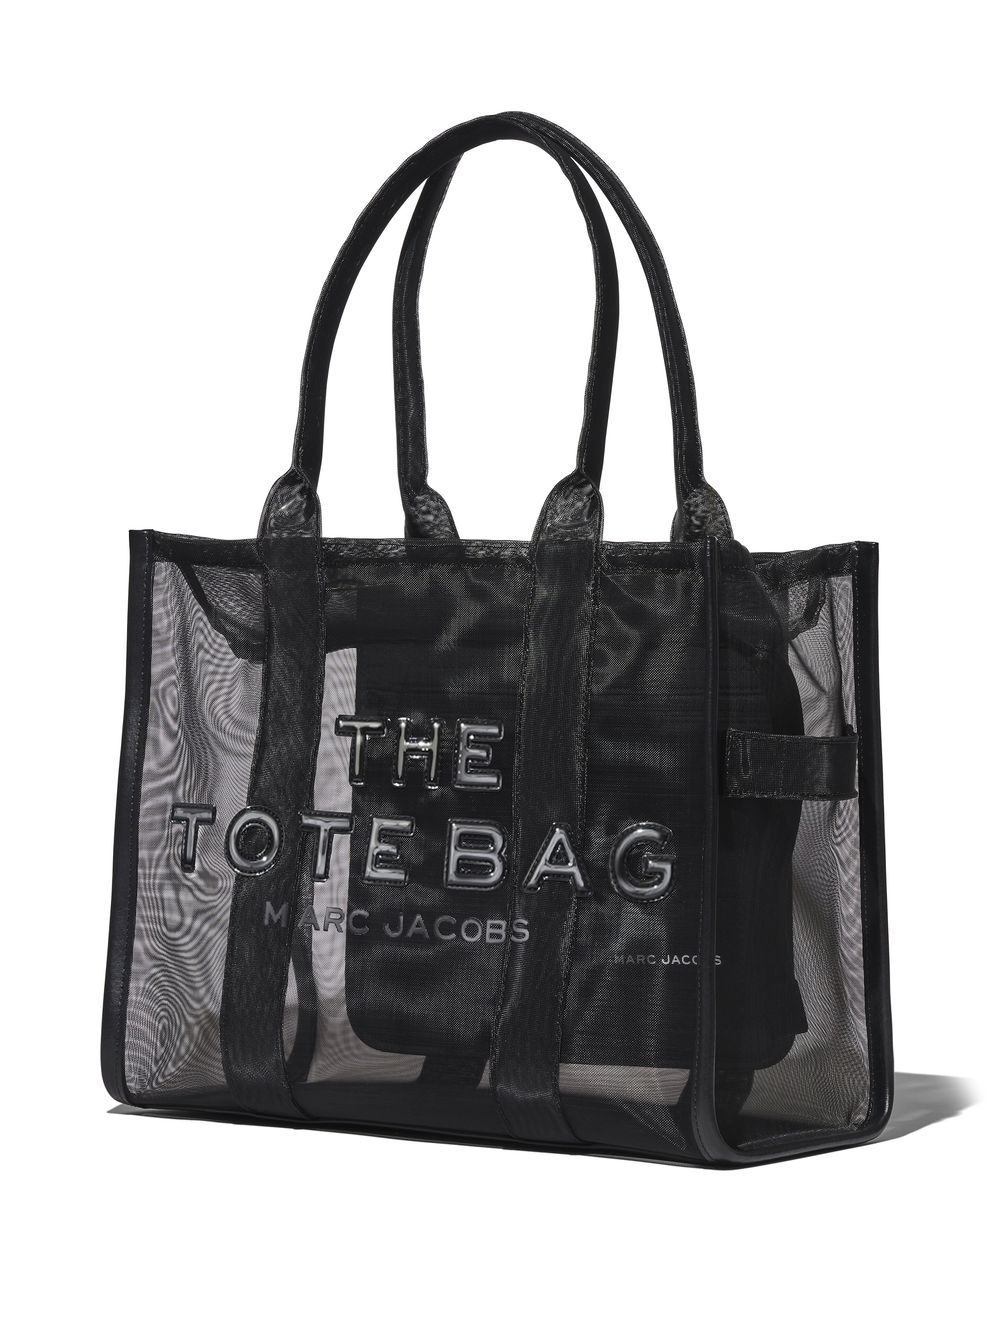 The Large Tote Bag from Marc Jacobs  